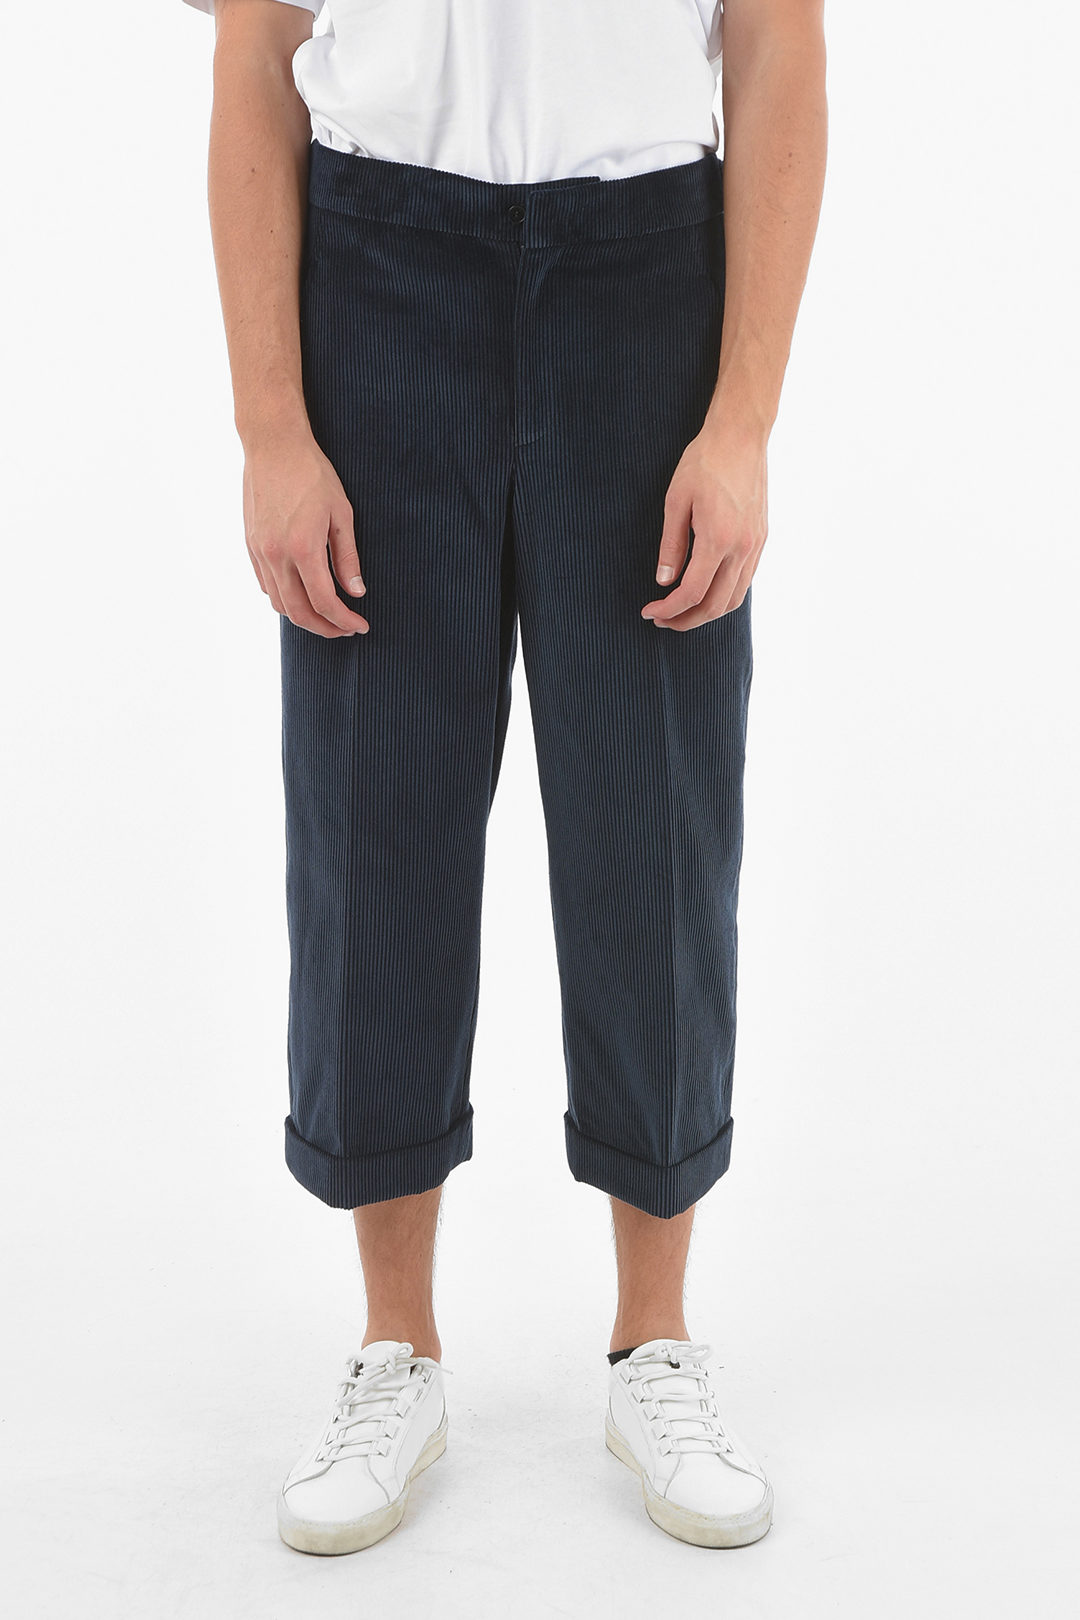 Neil Barrett Ribbed Velour Pants with Cuffed Ankles men - Glamood Outlet